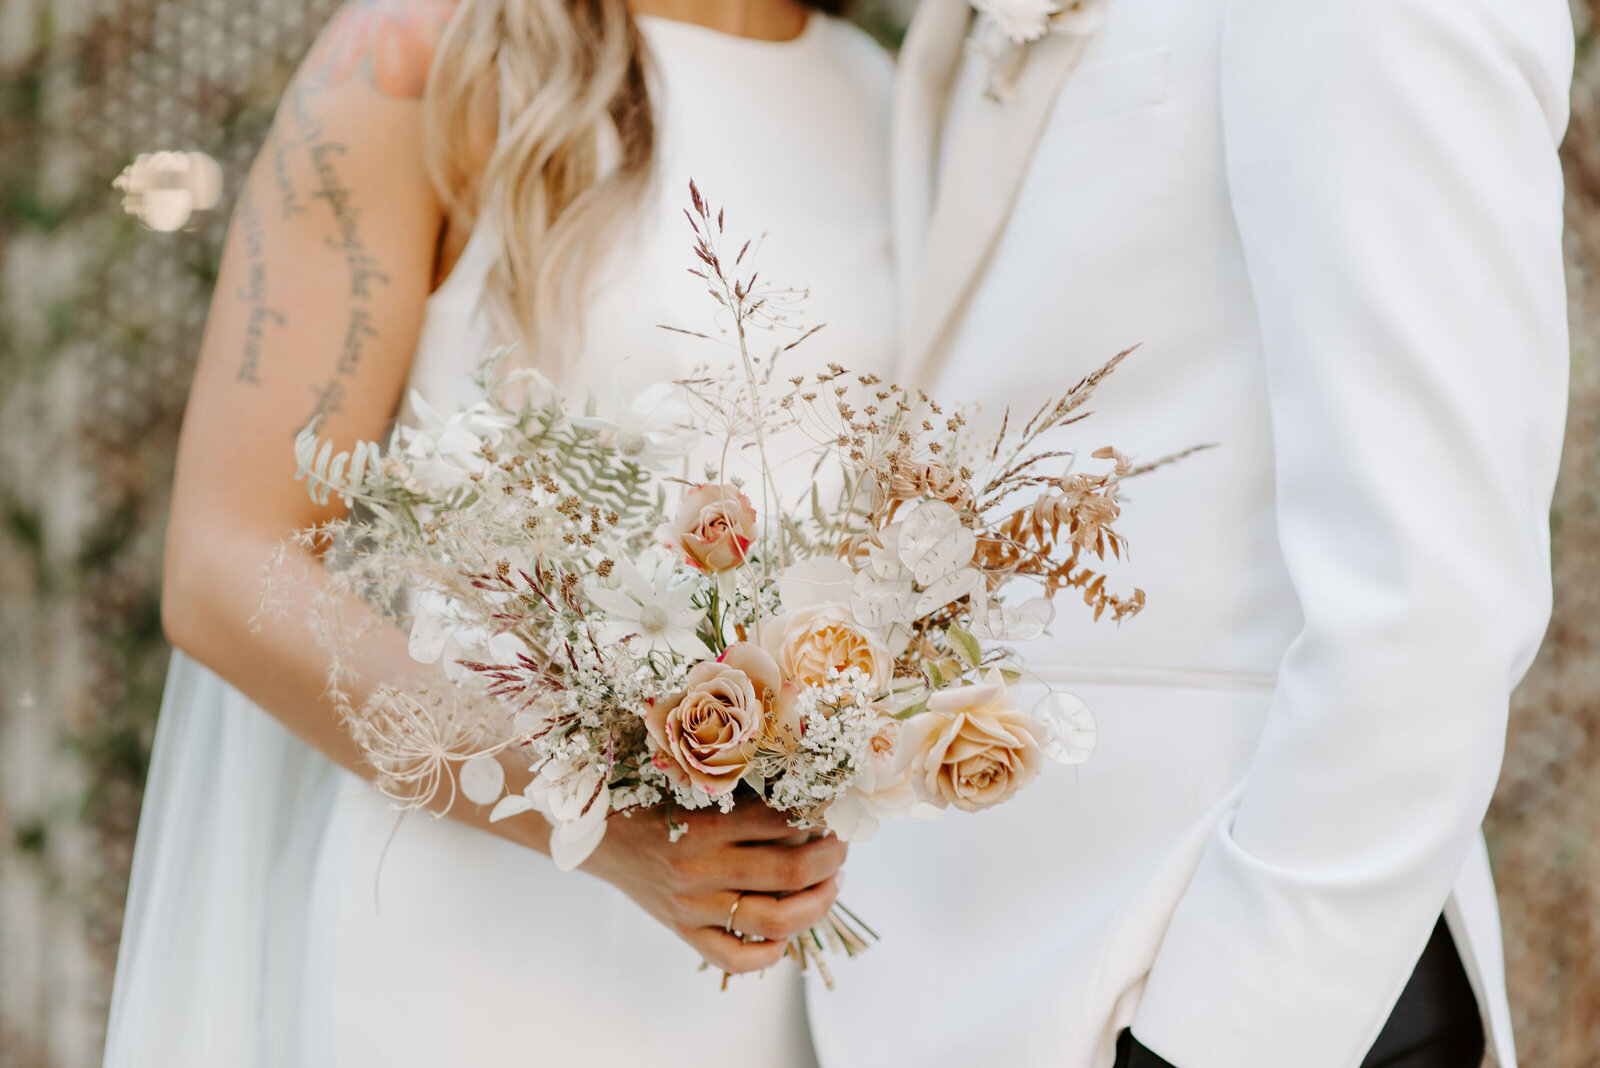 A small bridal bouquet is held by a bride who is close to her groom in Tulsa, Oklahoma.